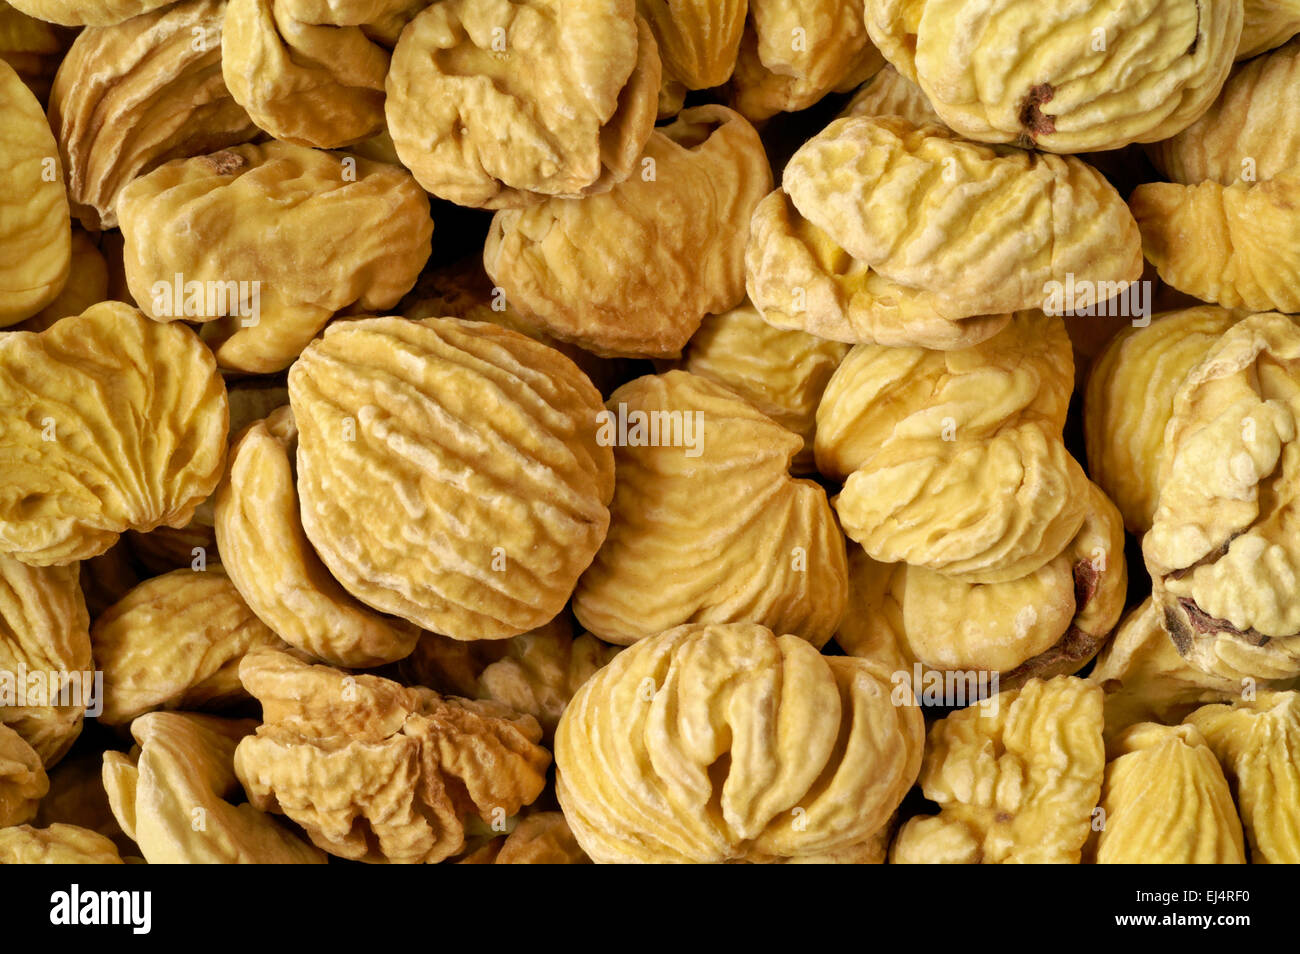 Dried chestnuts background close-up Stock Photo